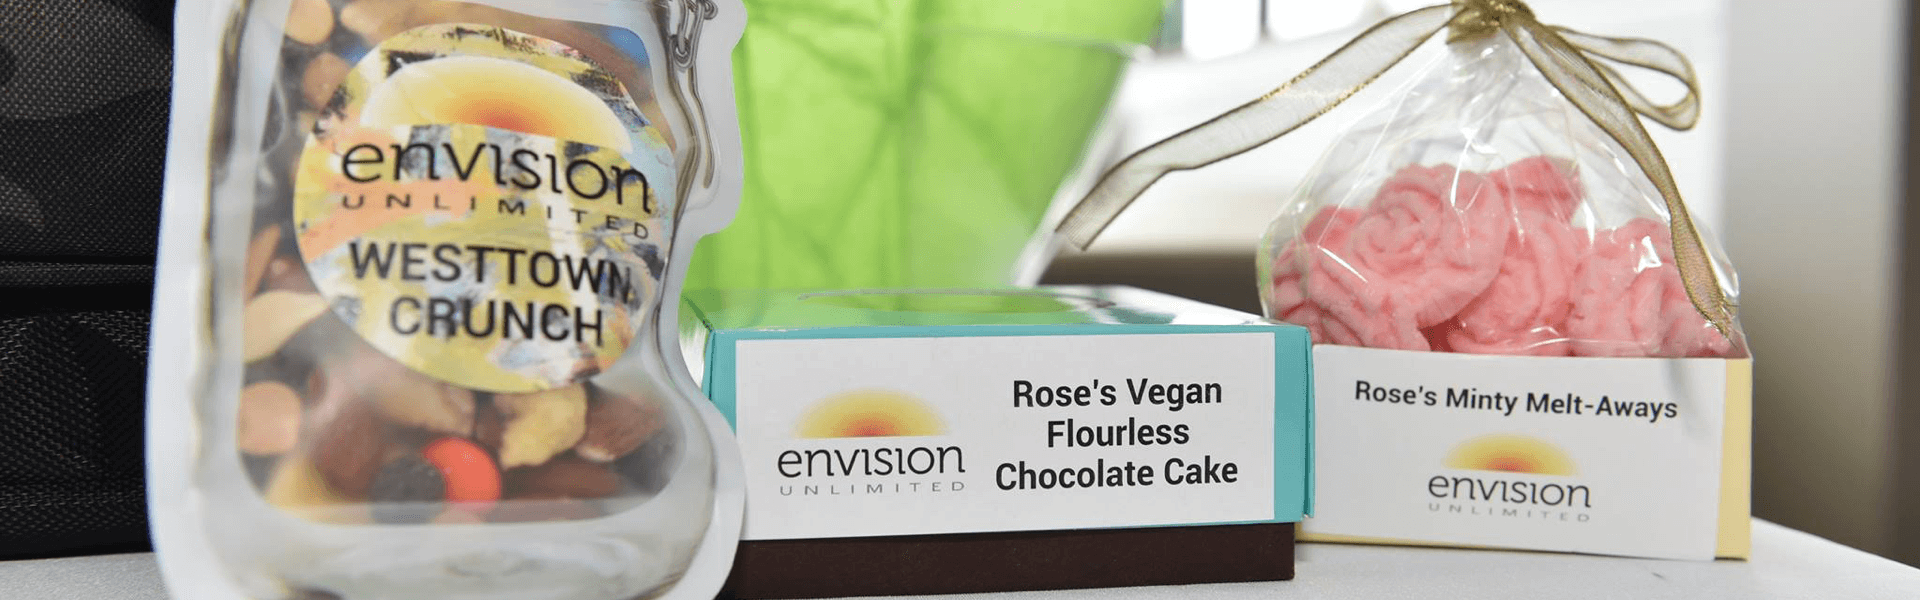 Products displayed with Envision logo branding on them